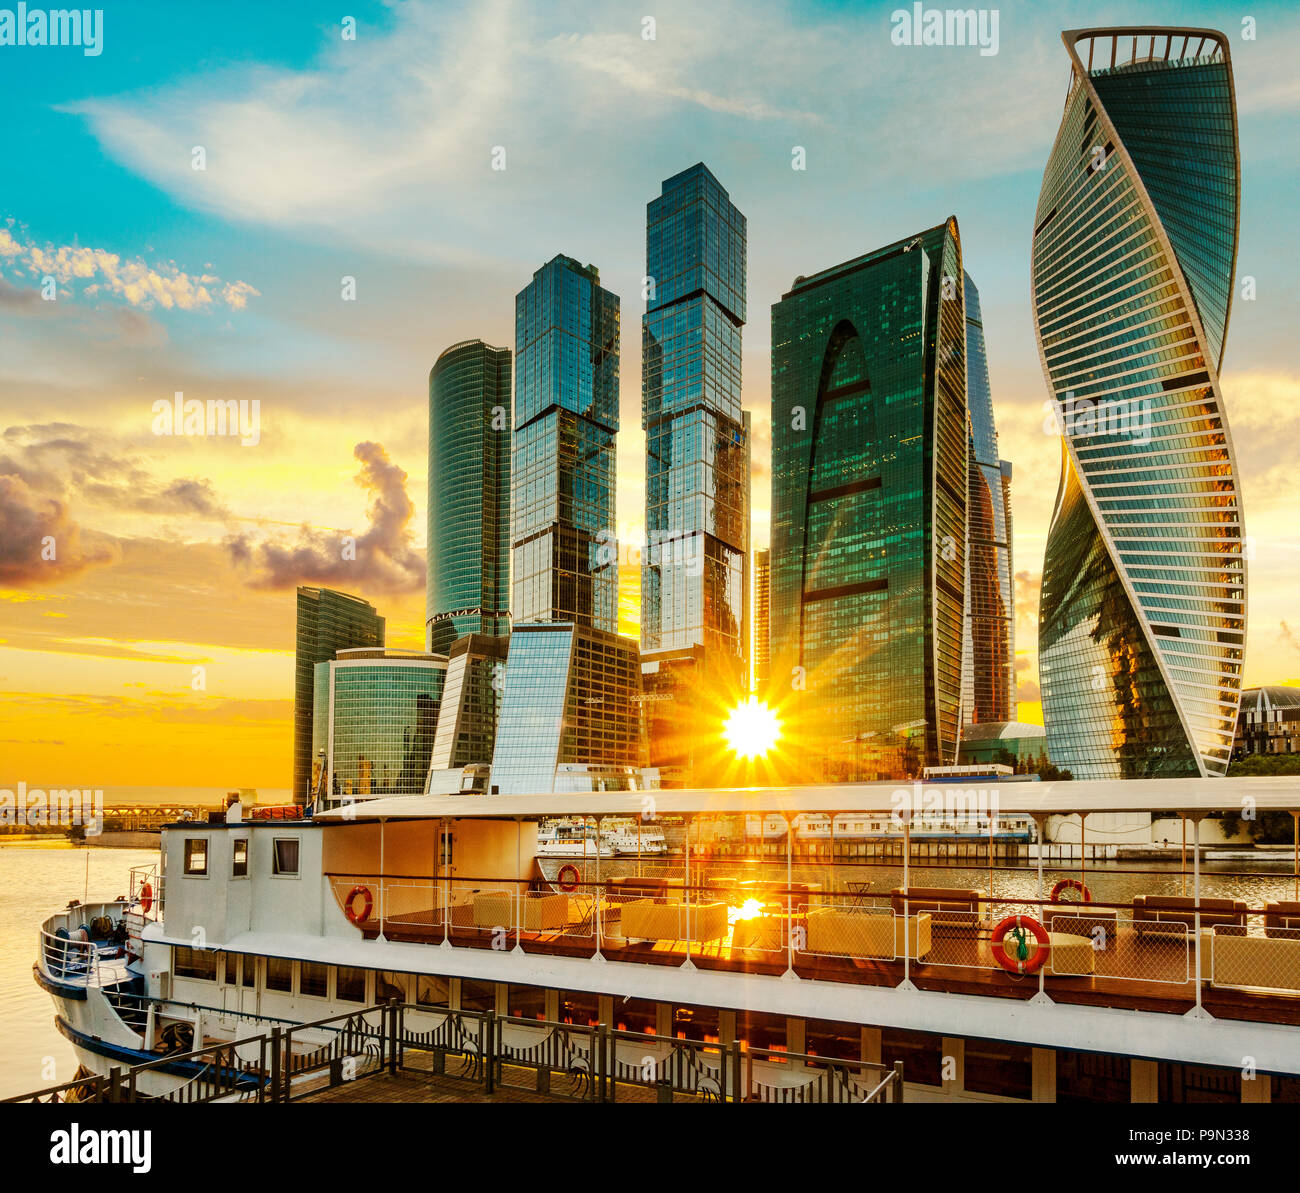 View of Moscow international business center (Moscow city) and pleasure boat against the setting sun, Russia Stock Photo